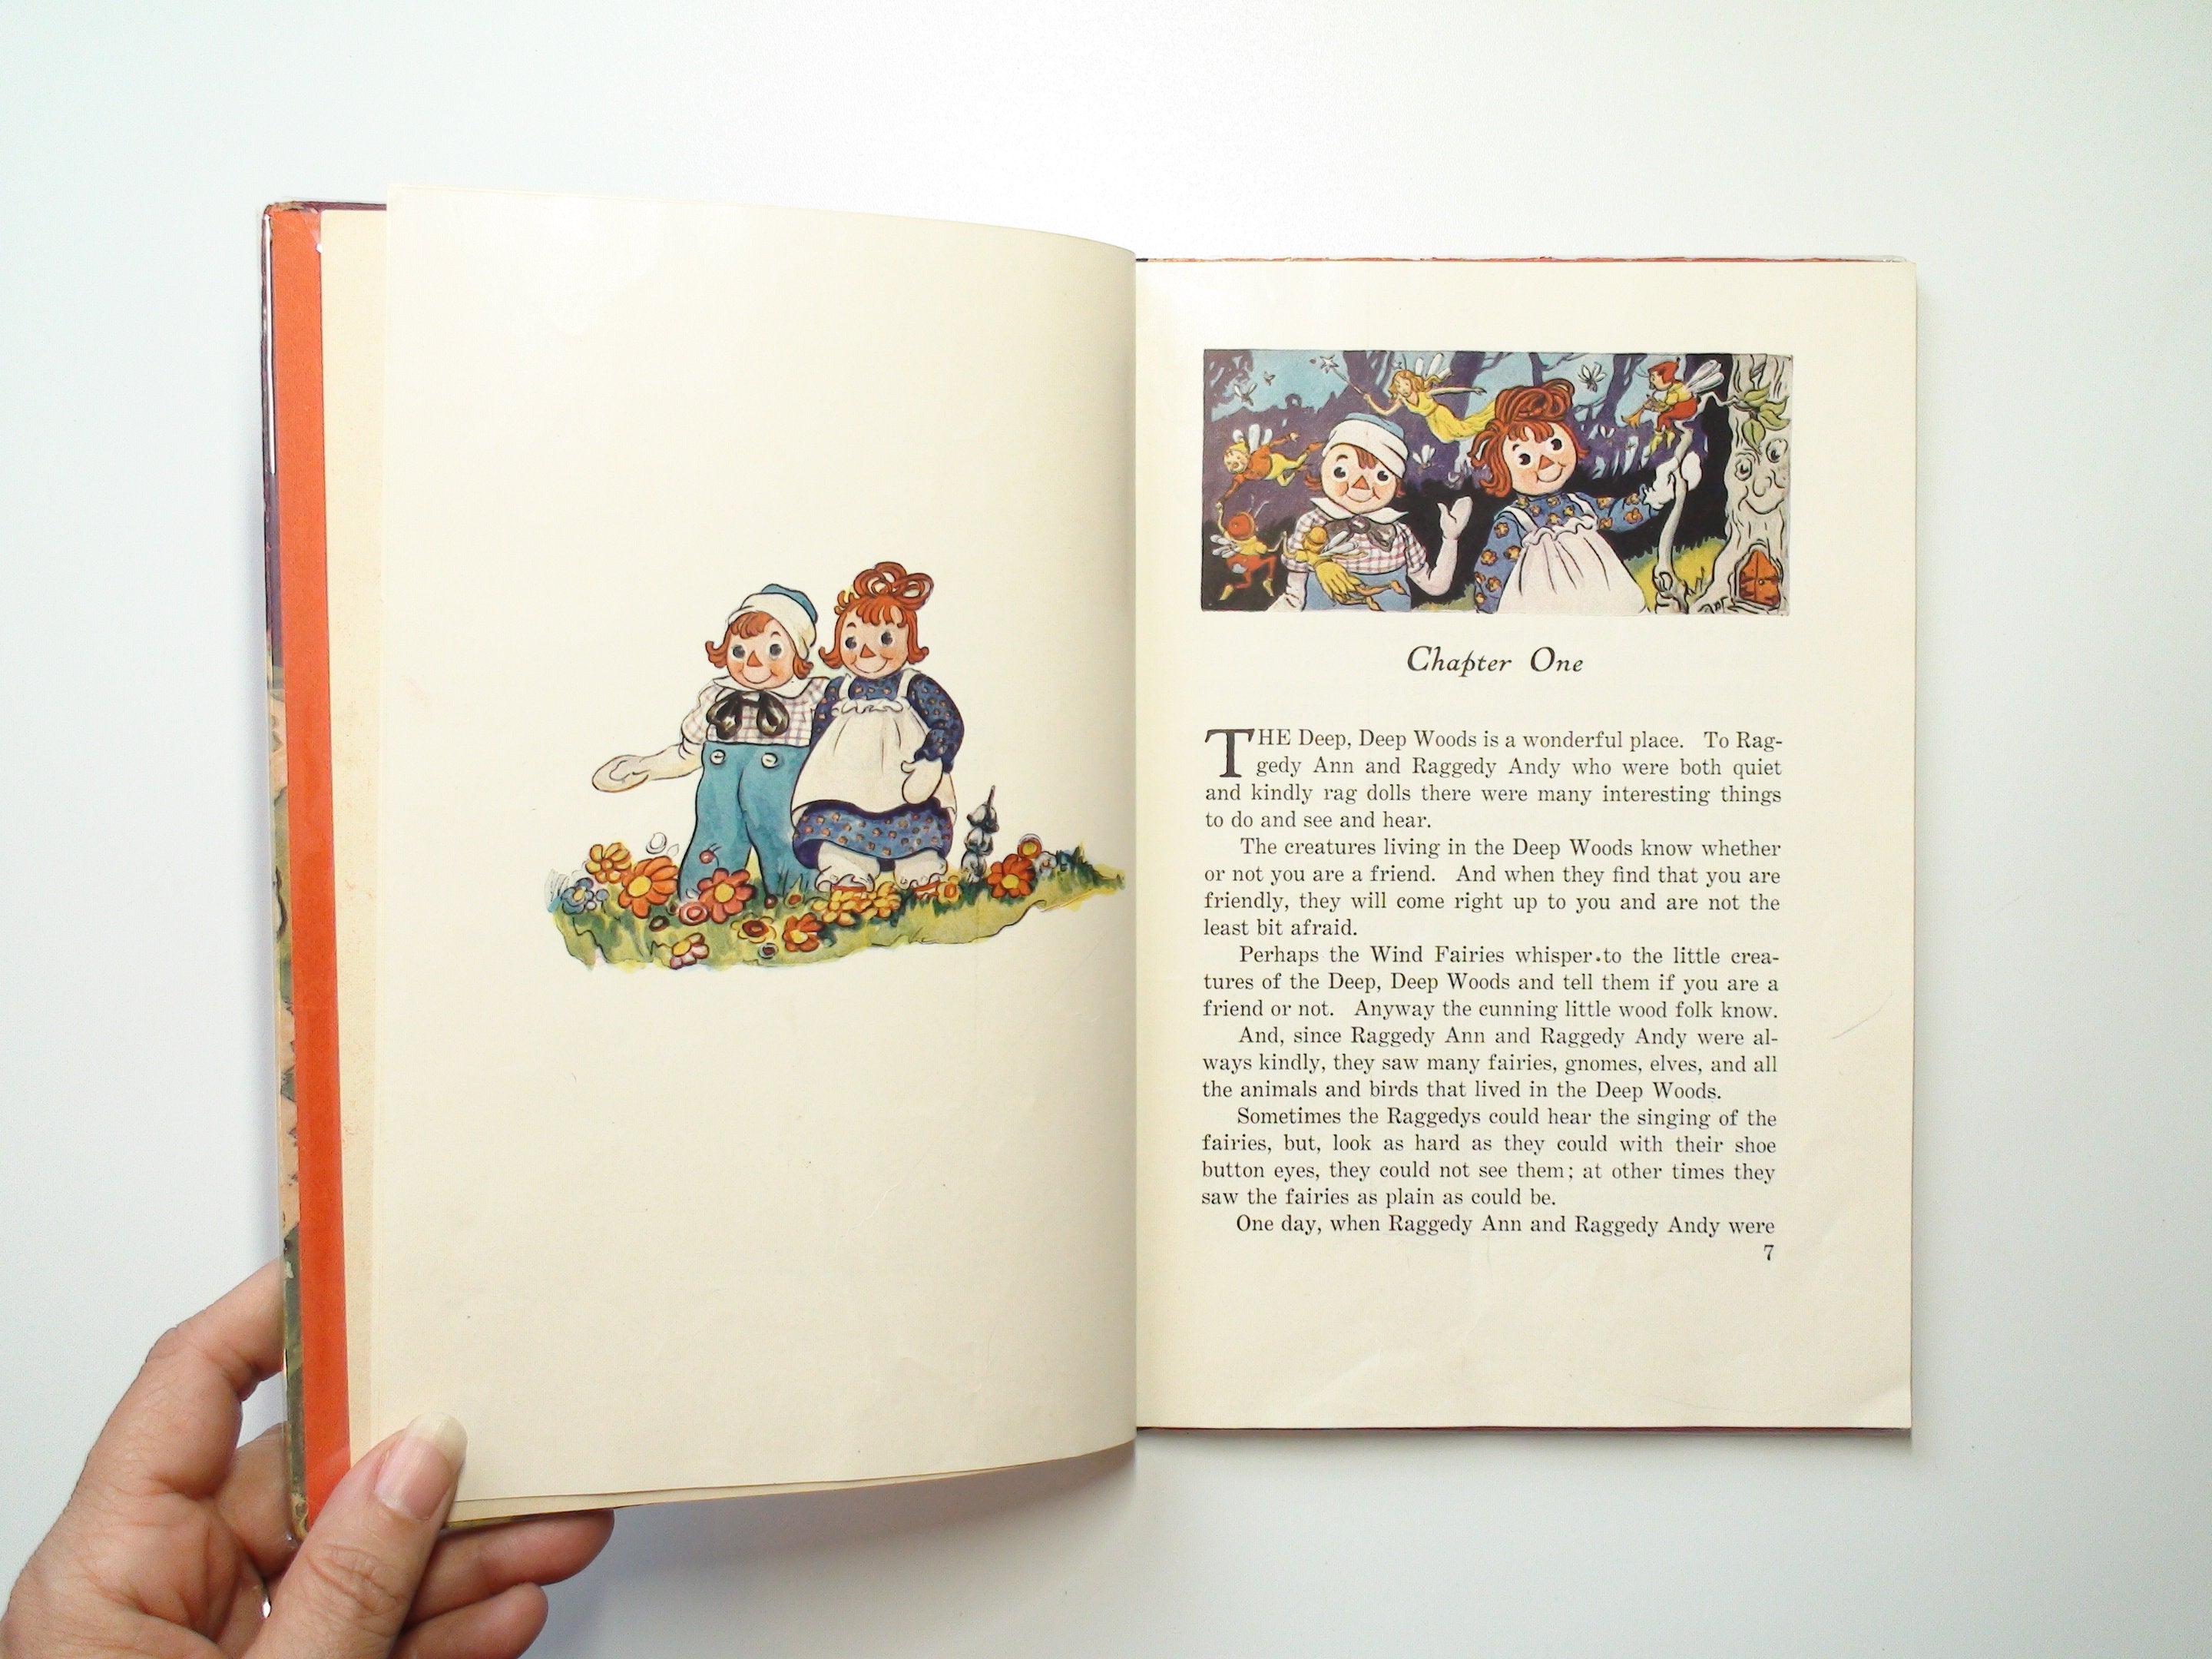 Raggedy Ann and Betsy Bonnet String, Johnny Gruelle, Illustrated, 1st Ed, 1943